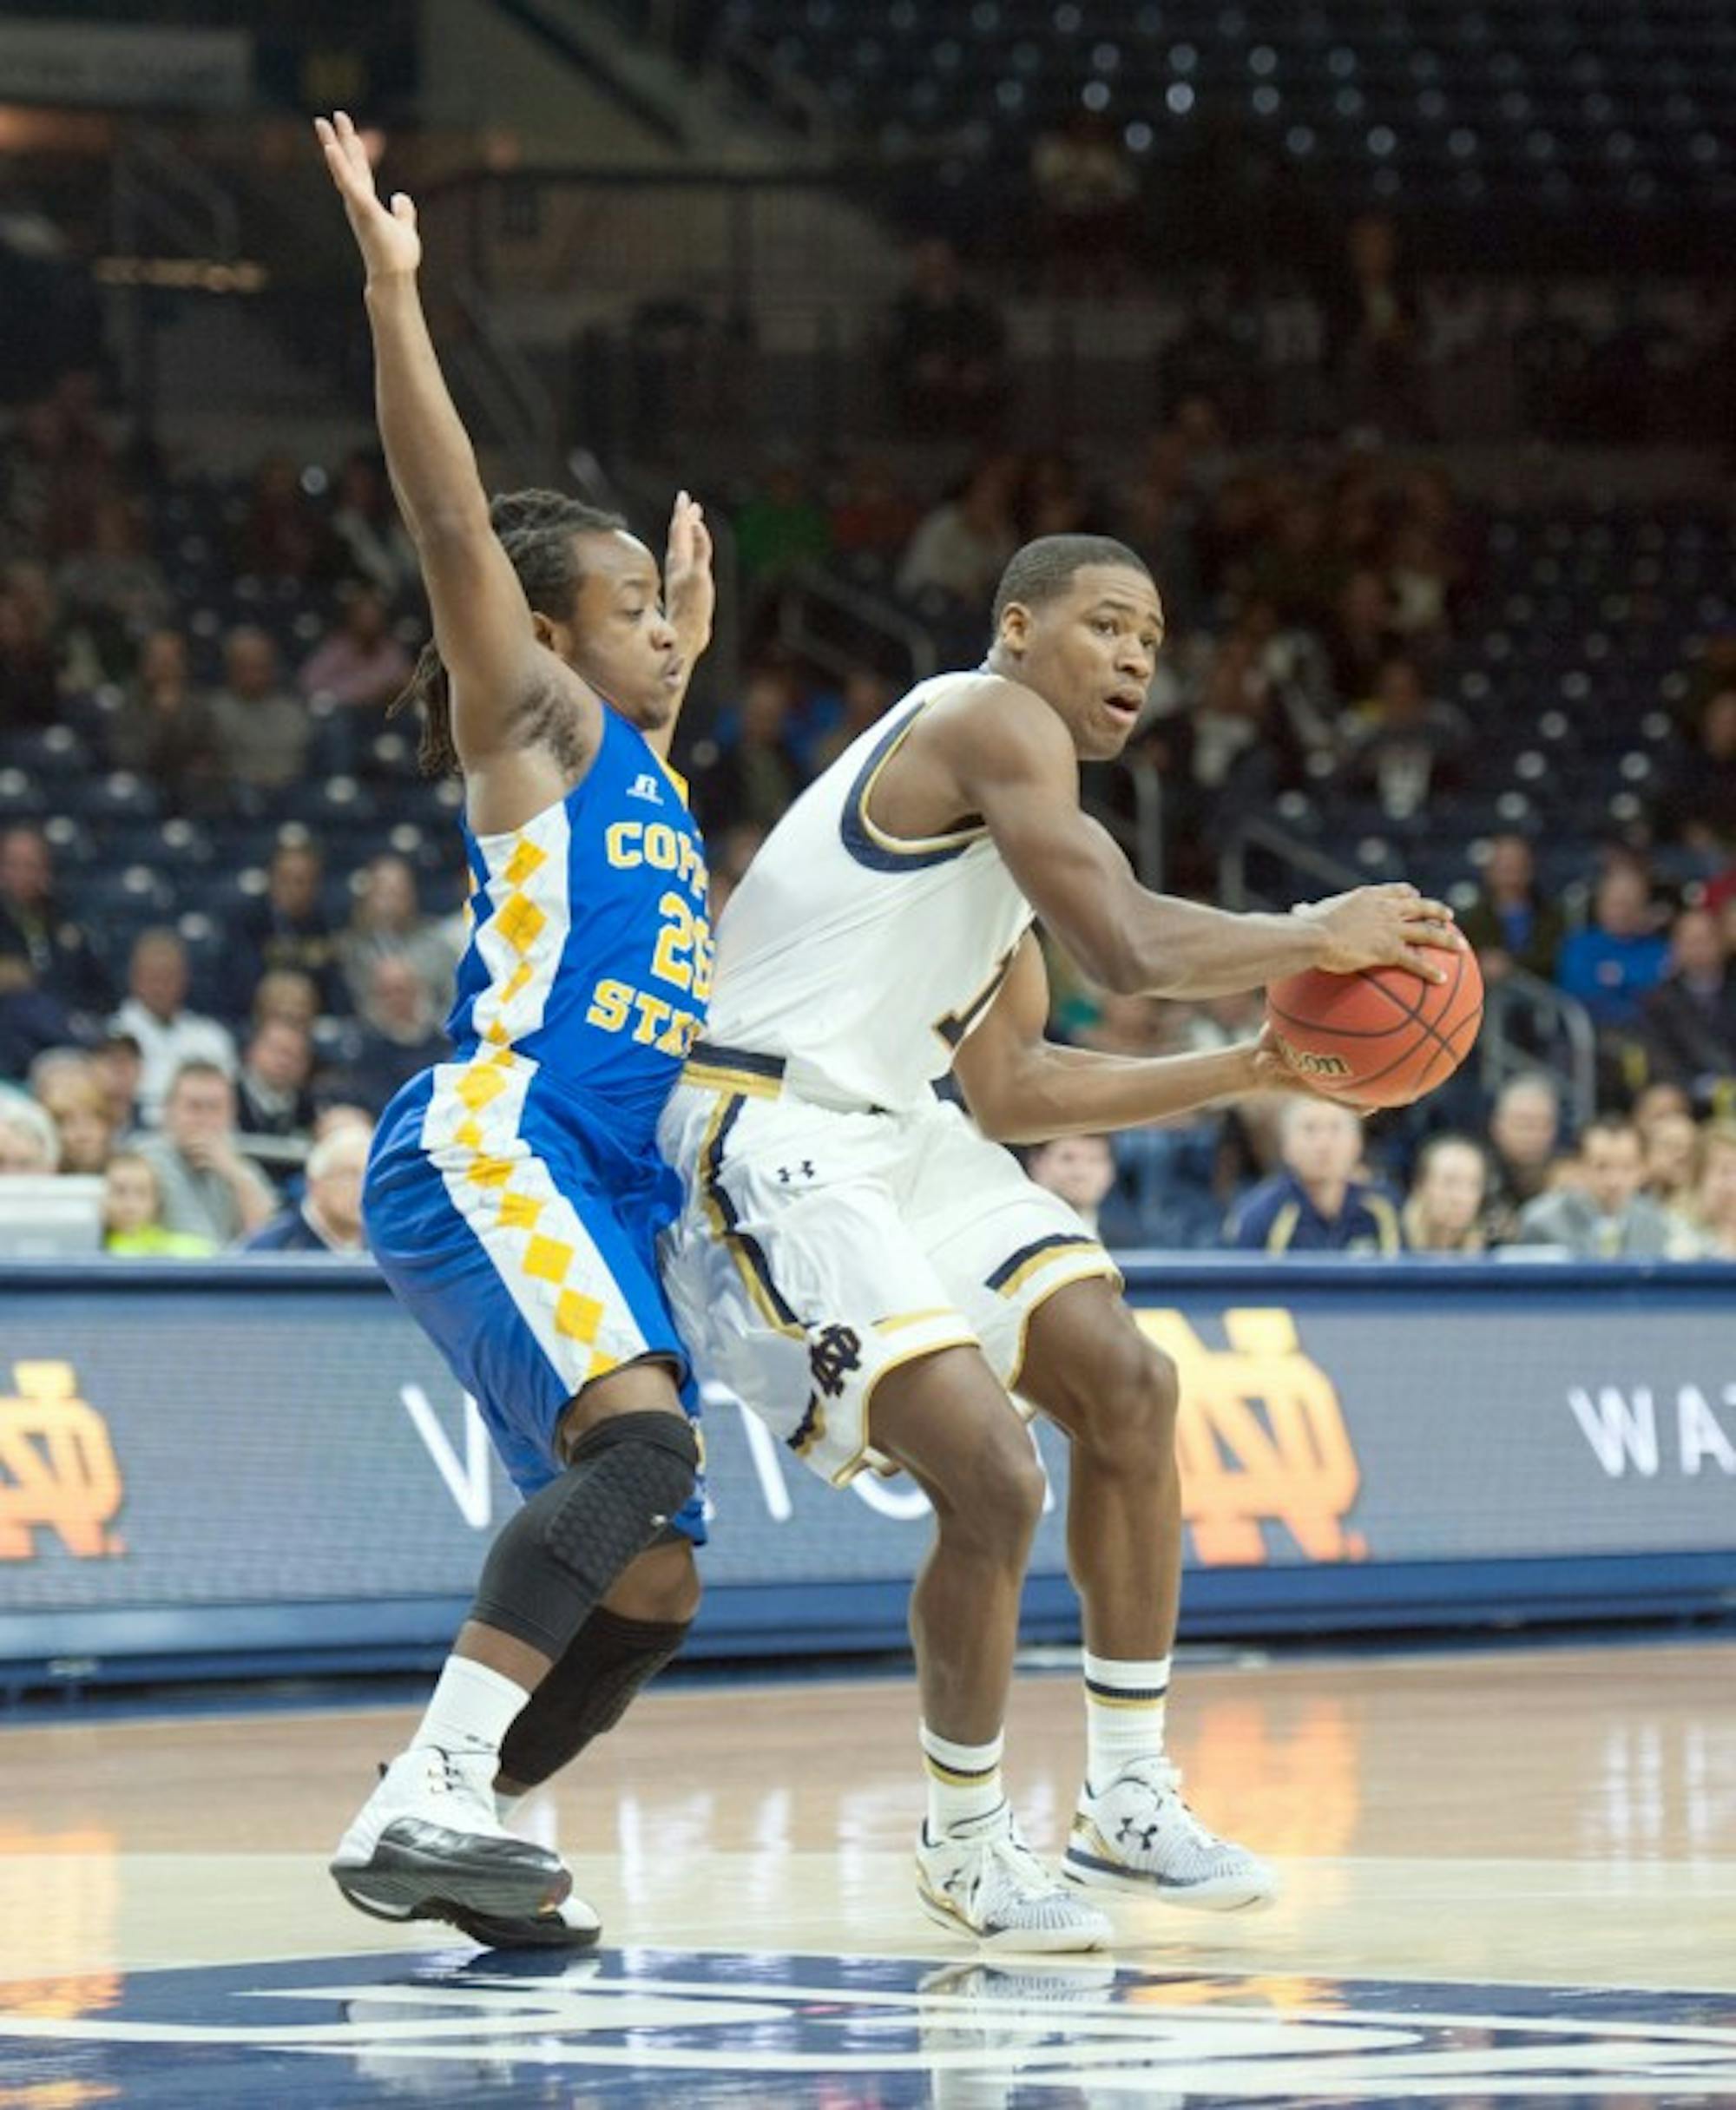 Irish sophomore guard Demetrius Jackson looks to pass during Notre Dame’s 104-67 win over Coppin State on Nov. 19 at Purcell Pavilion.